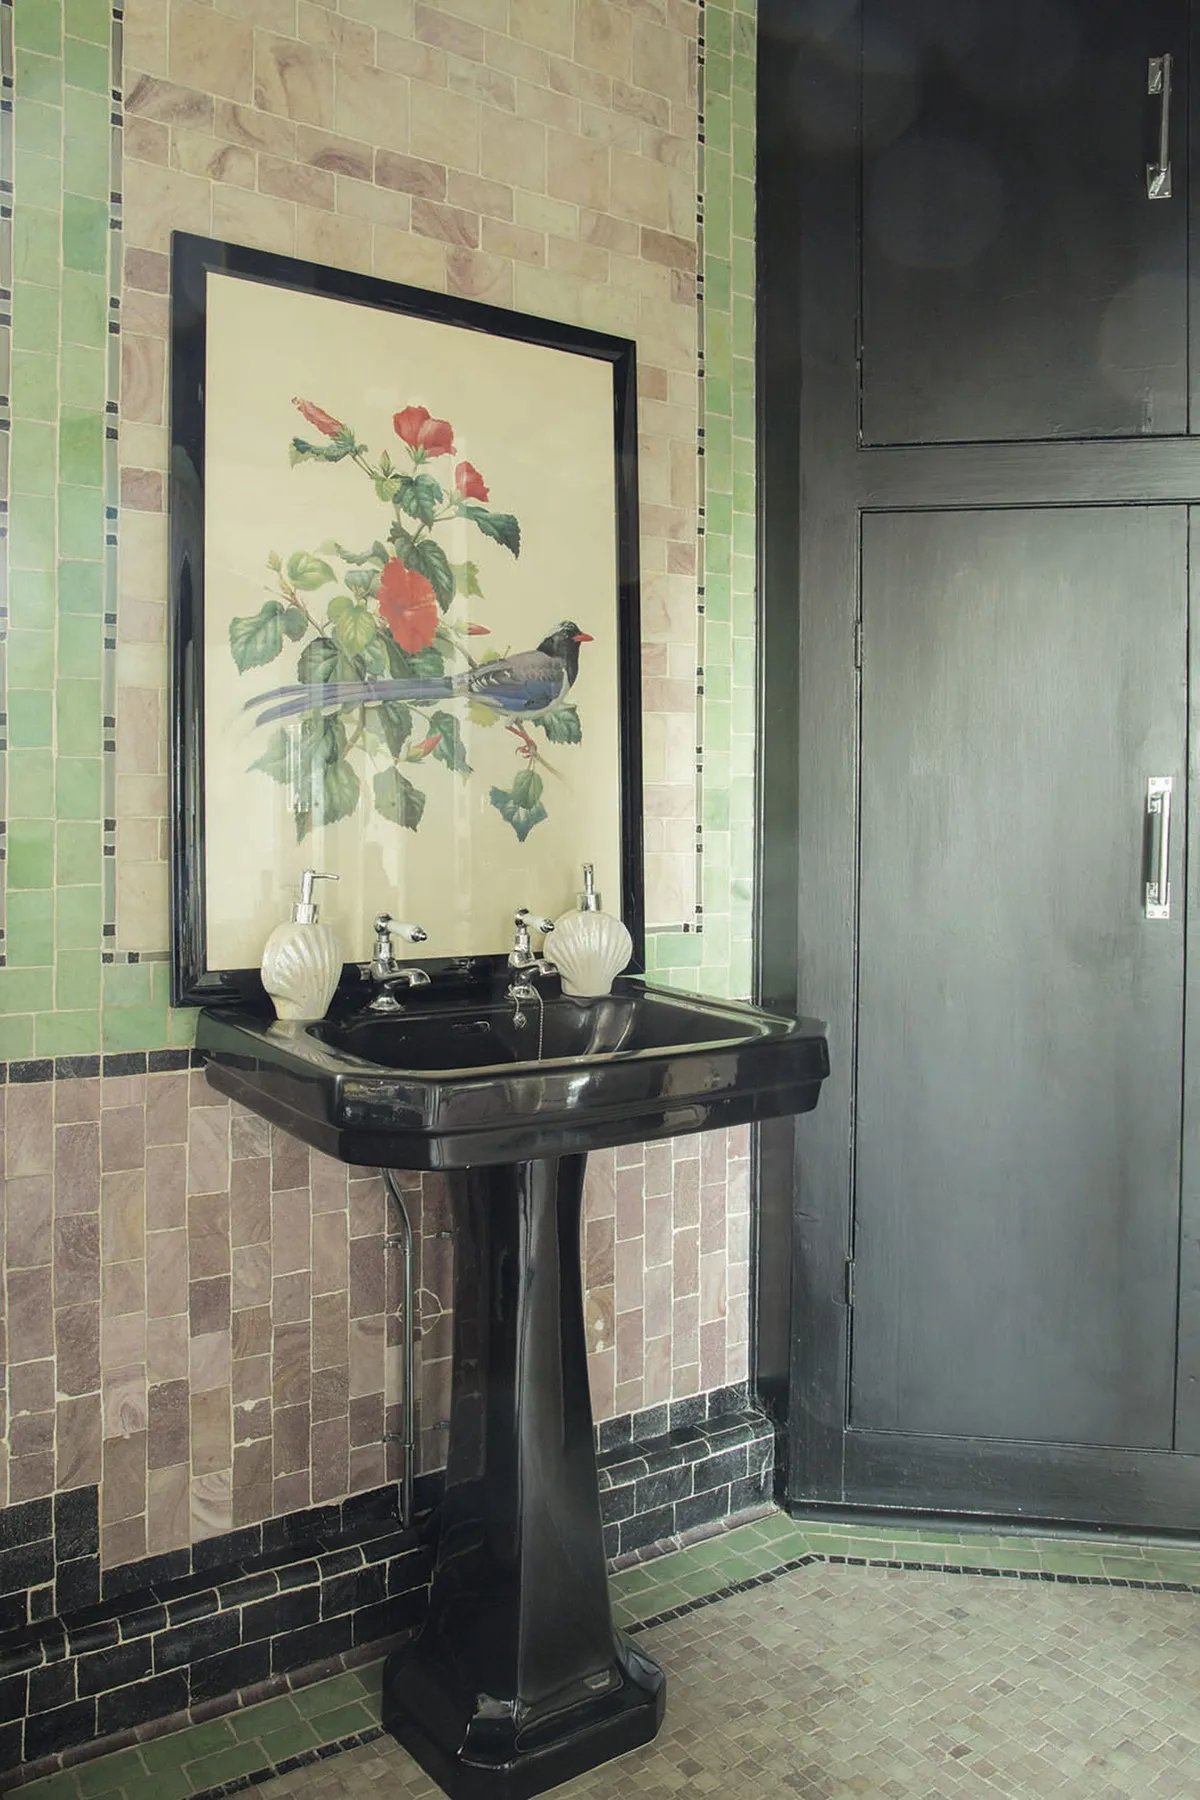 To put her own stamp on her Art Deco bathroom without taking away any charm, Siobhan painted the ceiling, radiator and woodwork black, left the original green tiles, then styled it with plush finishes. See inside Interior Design Masters star Siobhan Murphy’s home here!